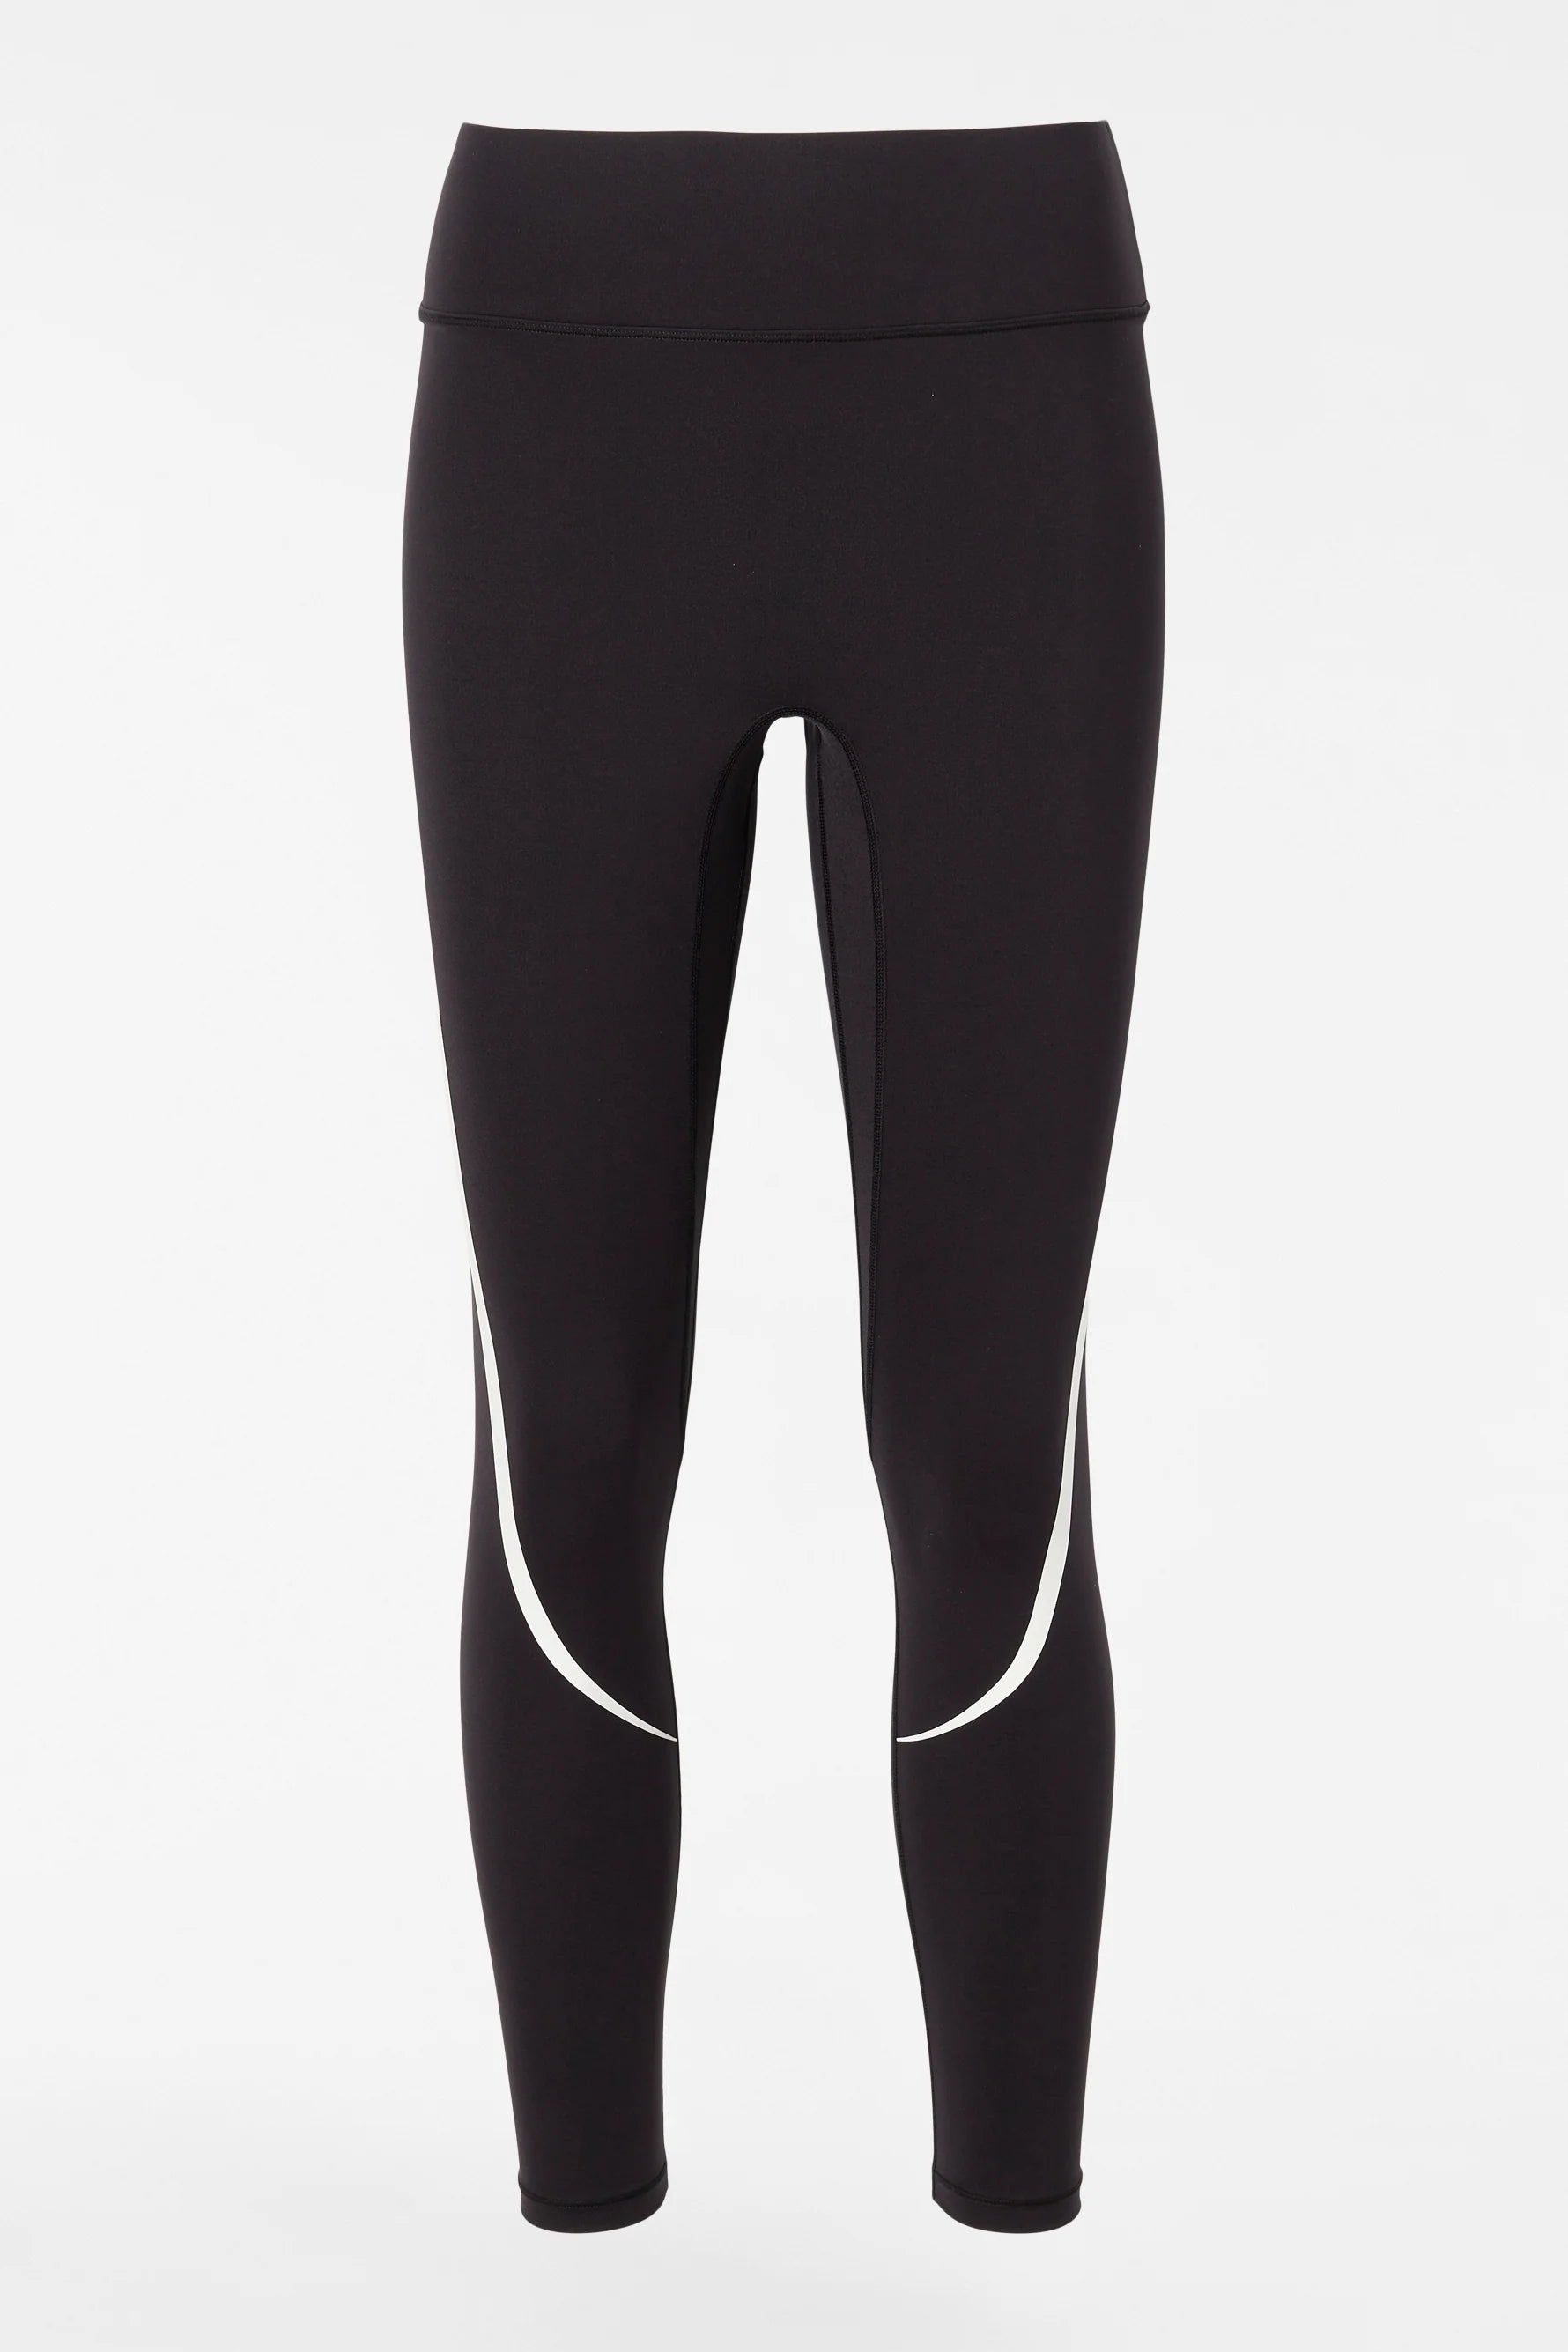 Bandier All Motion Center Stage Contrast Legging